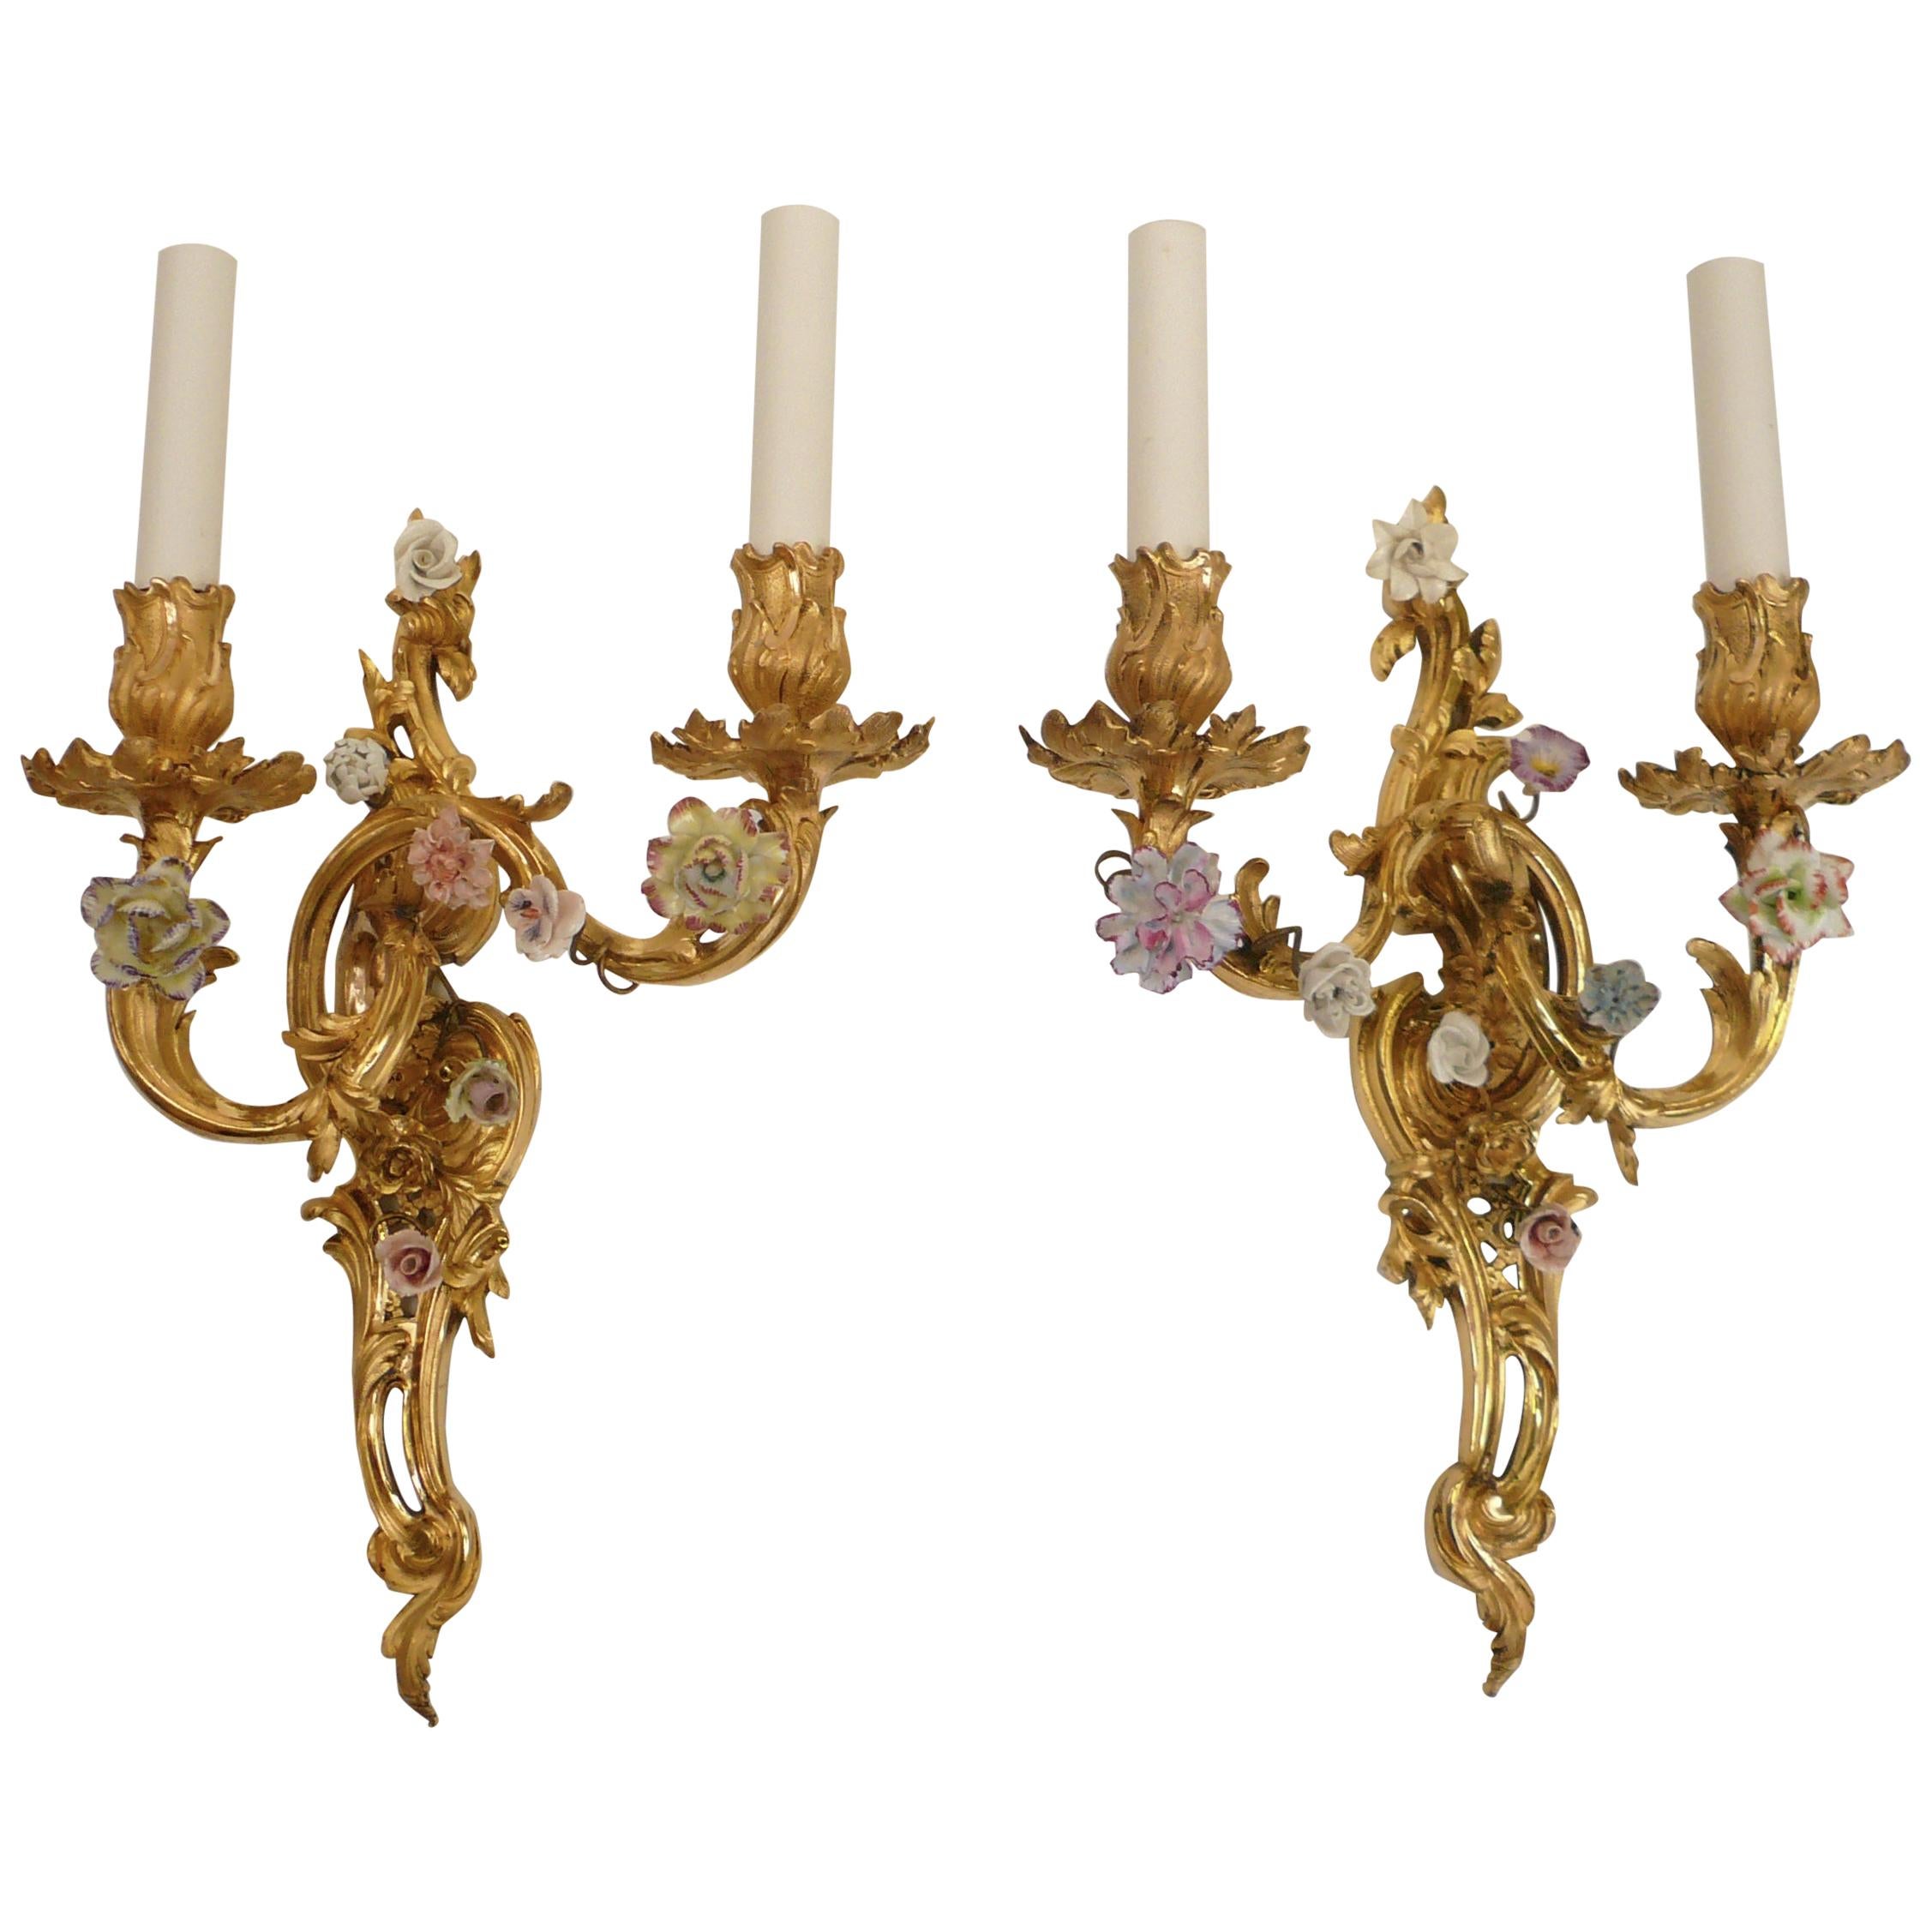 Extra Fine Pair of Louis XV Style Gilt Bronze and Porcelain Flower Sconces